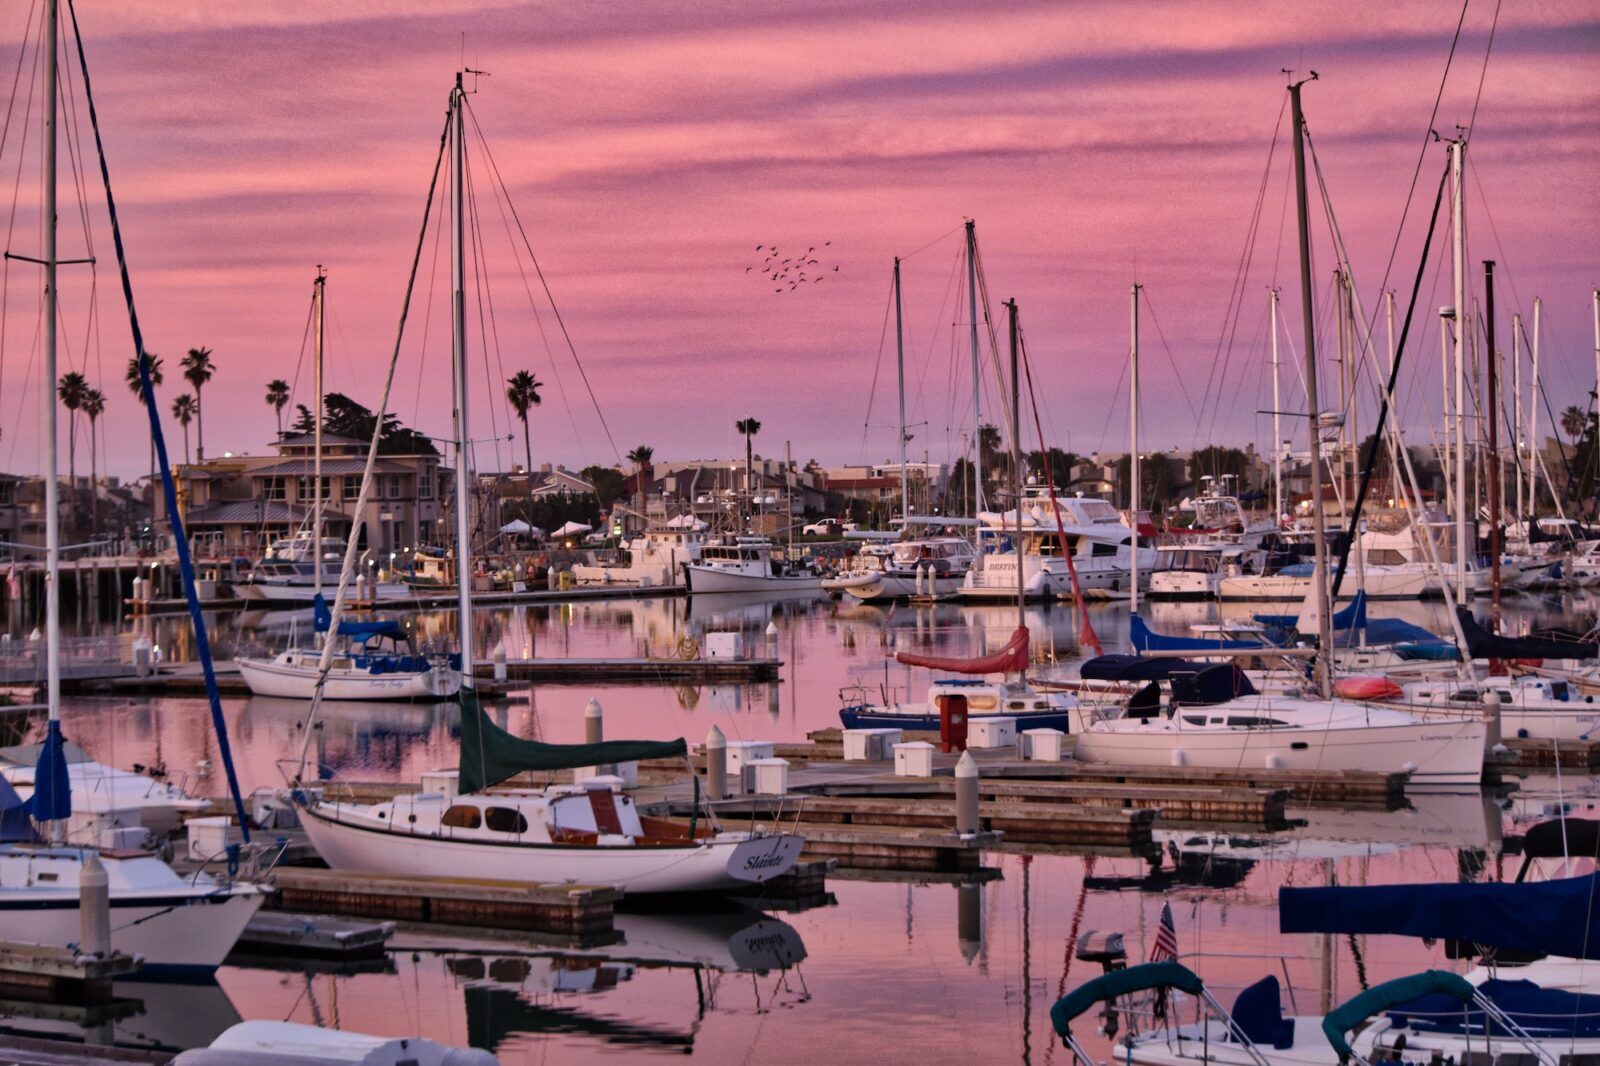 Pink sunrise over a crowded marina filled with recreational boats in Oxnard California